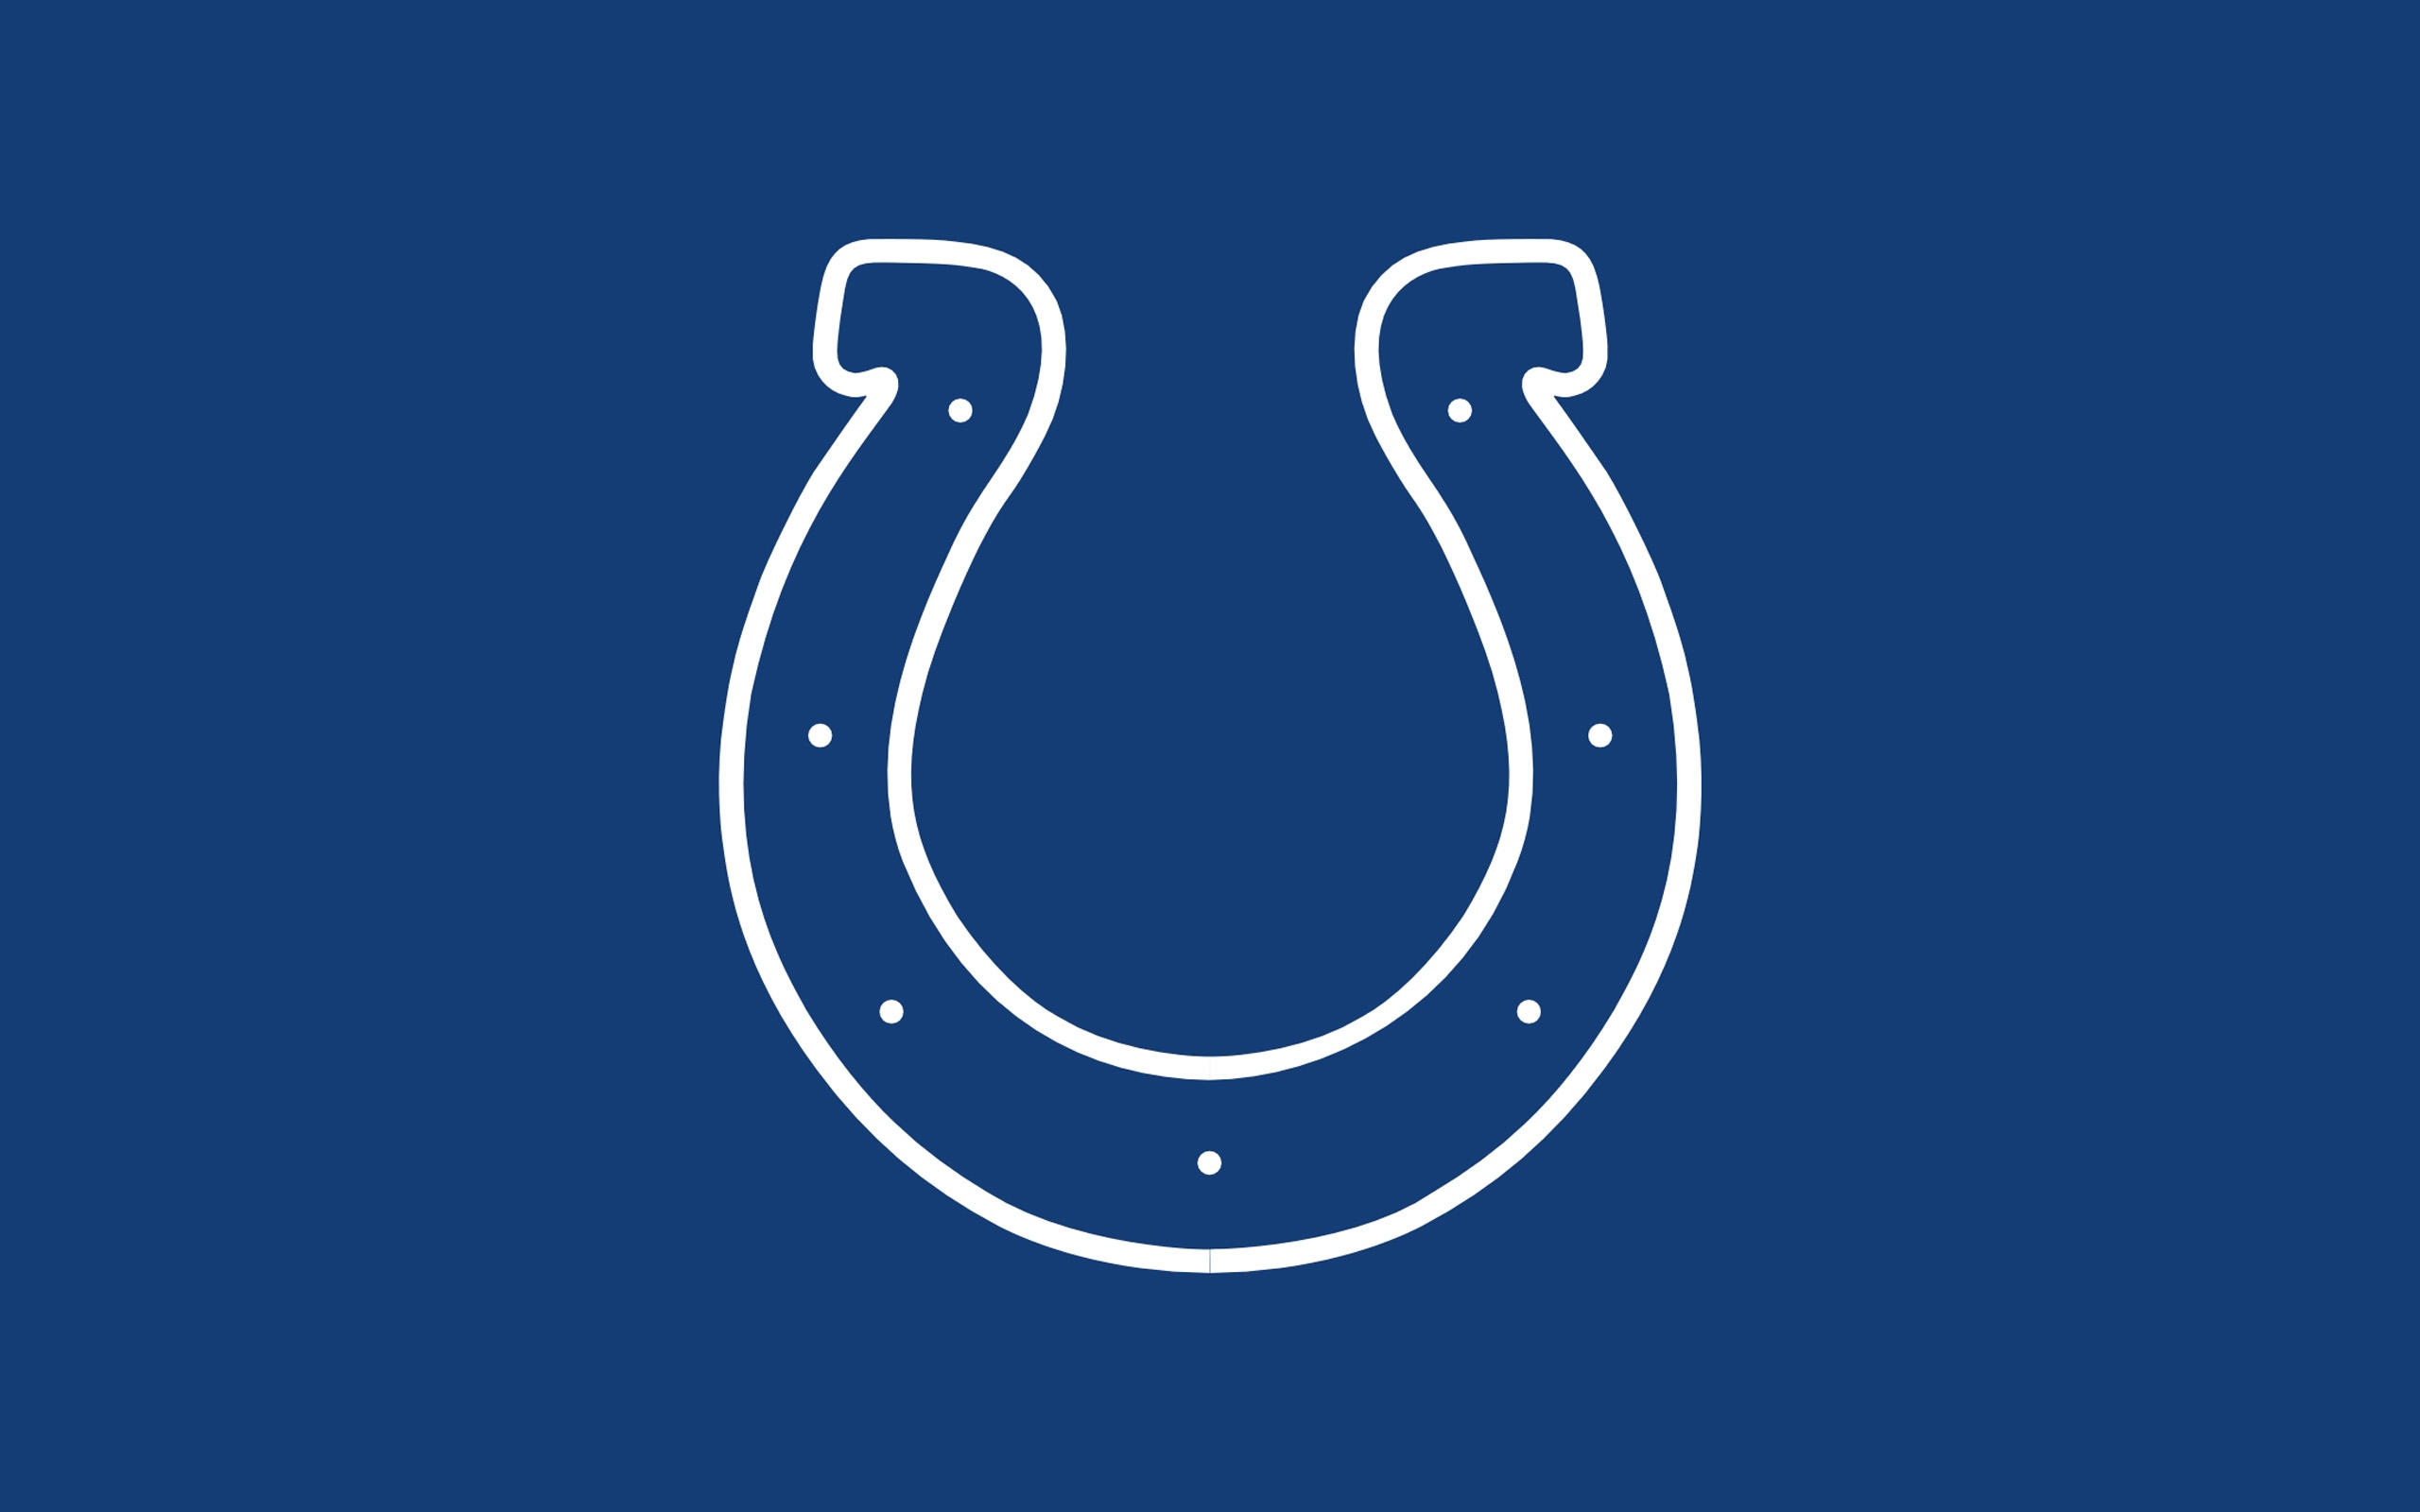 Indianapolis Colts Wallpaper Image On